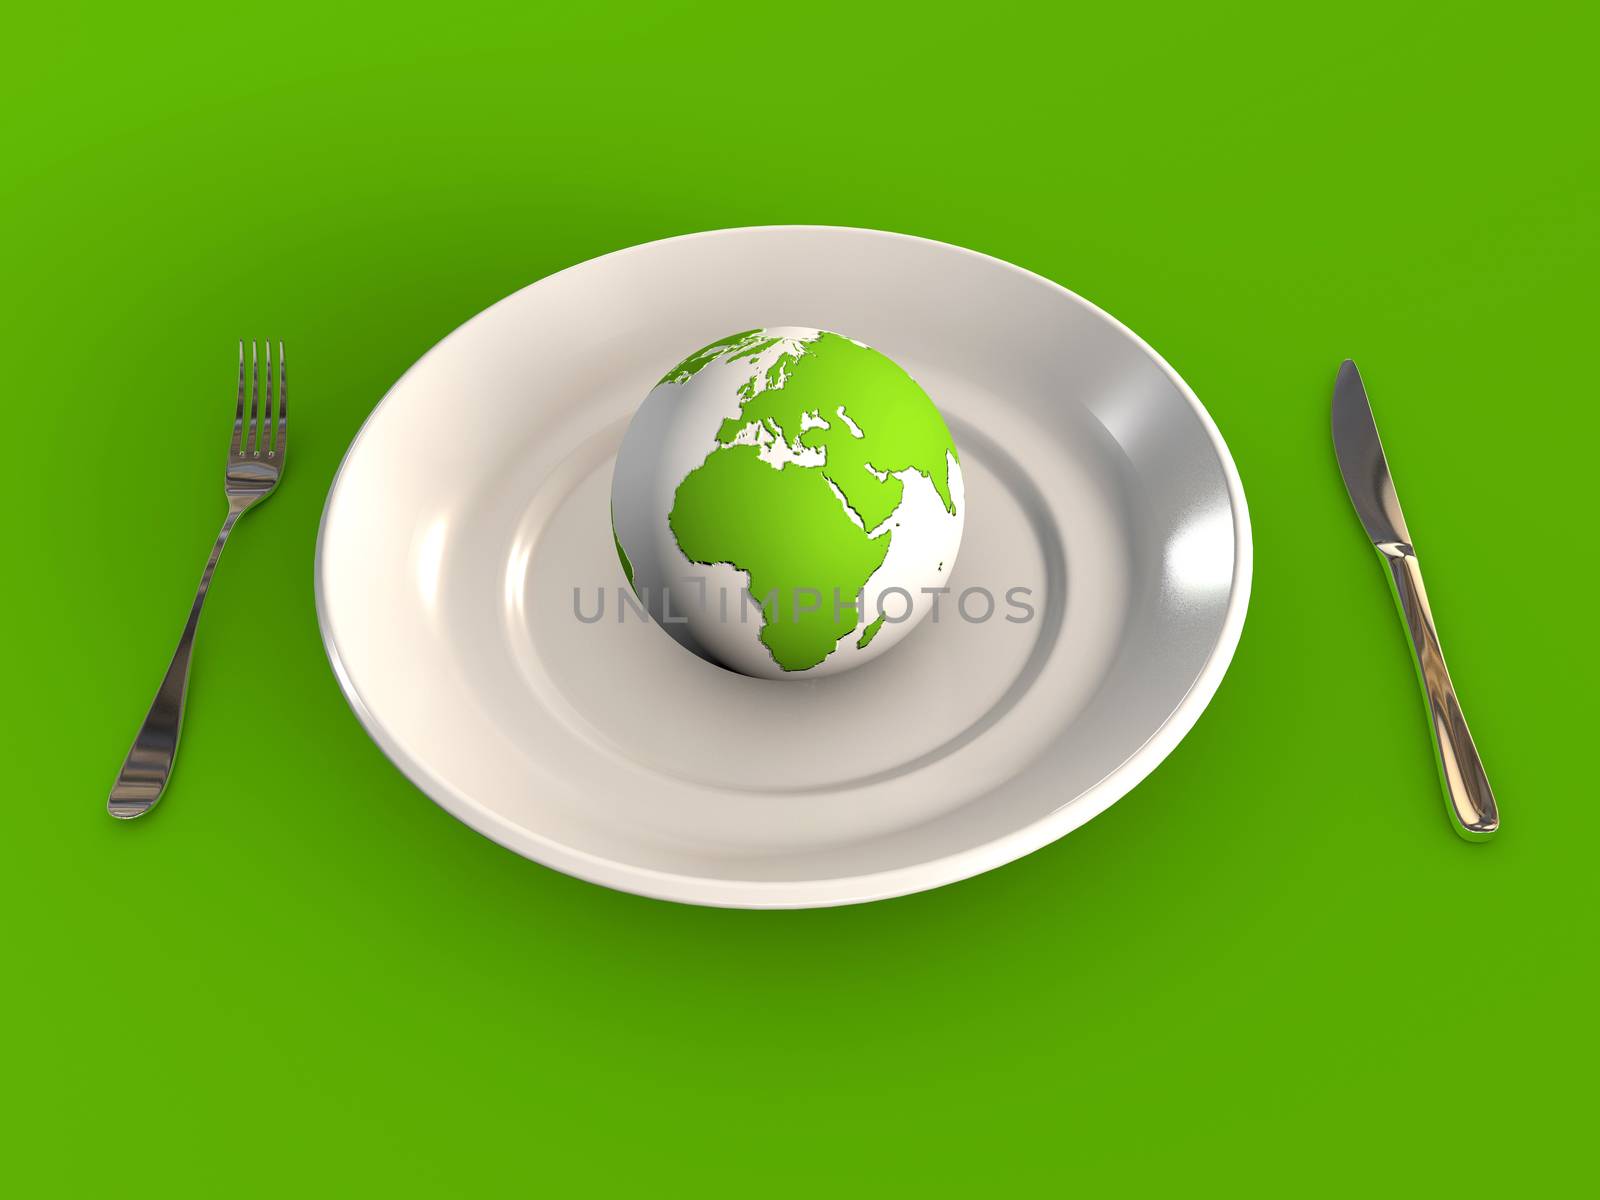 Globe on a plate illustrating global politics food health industry 3d rendered concept on green background